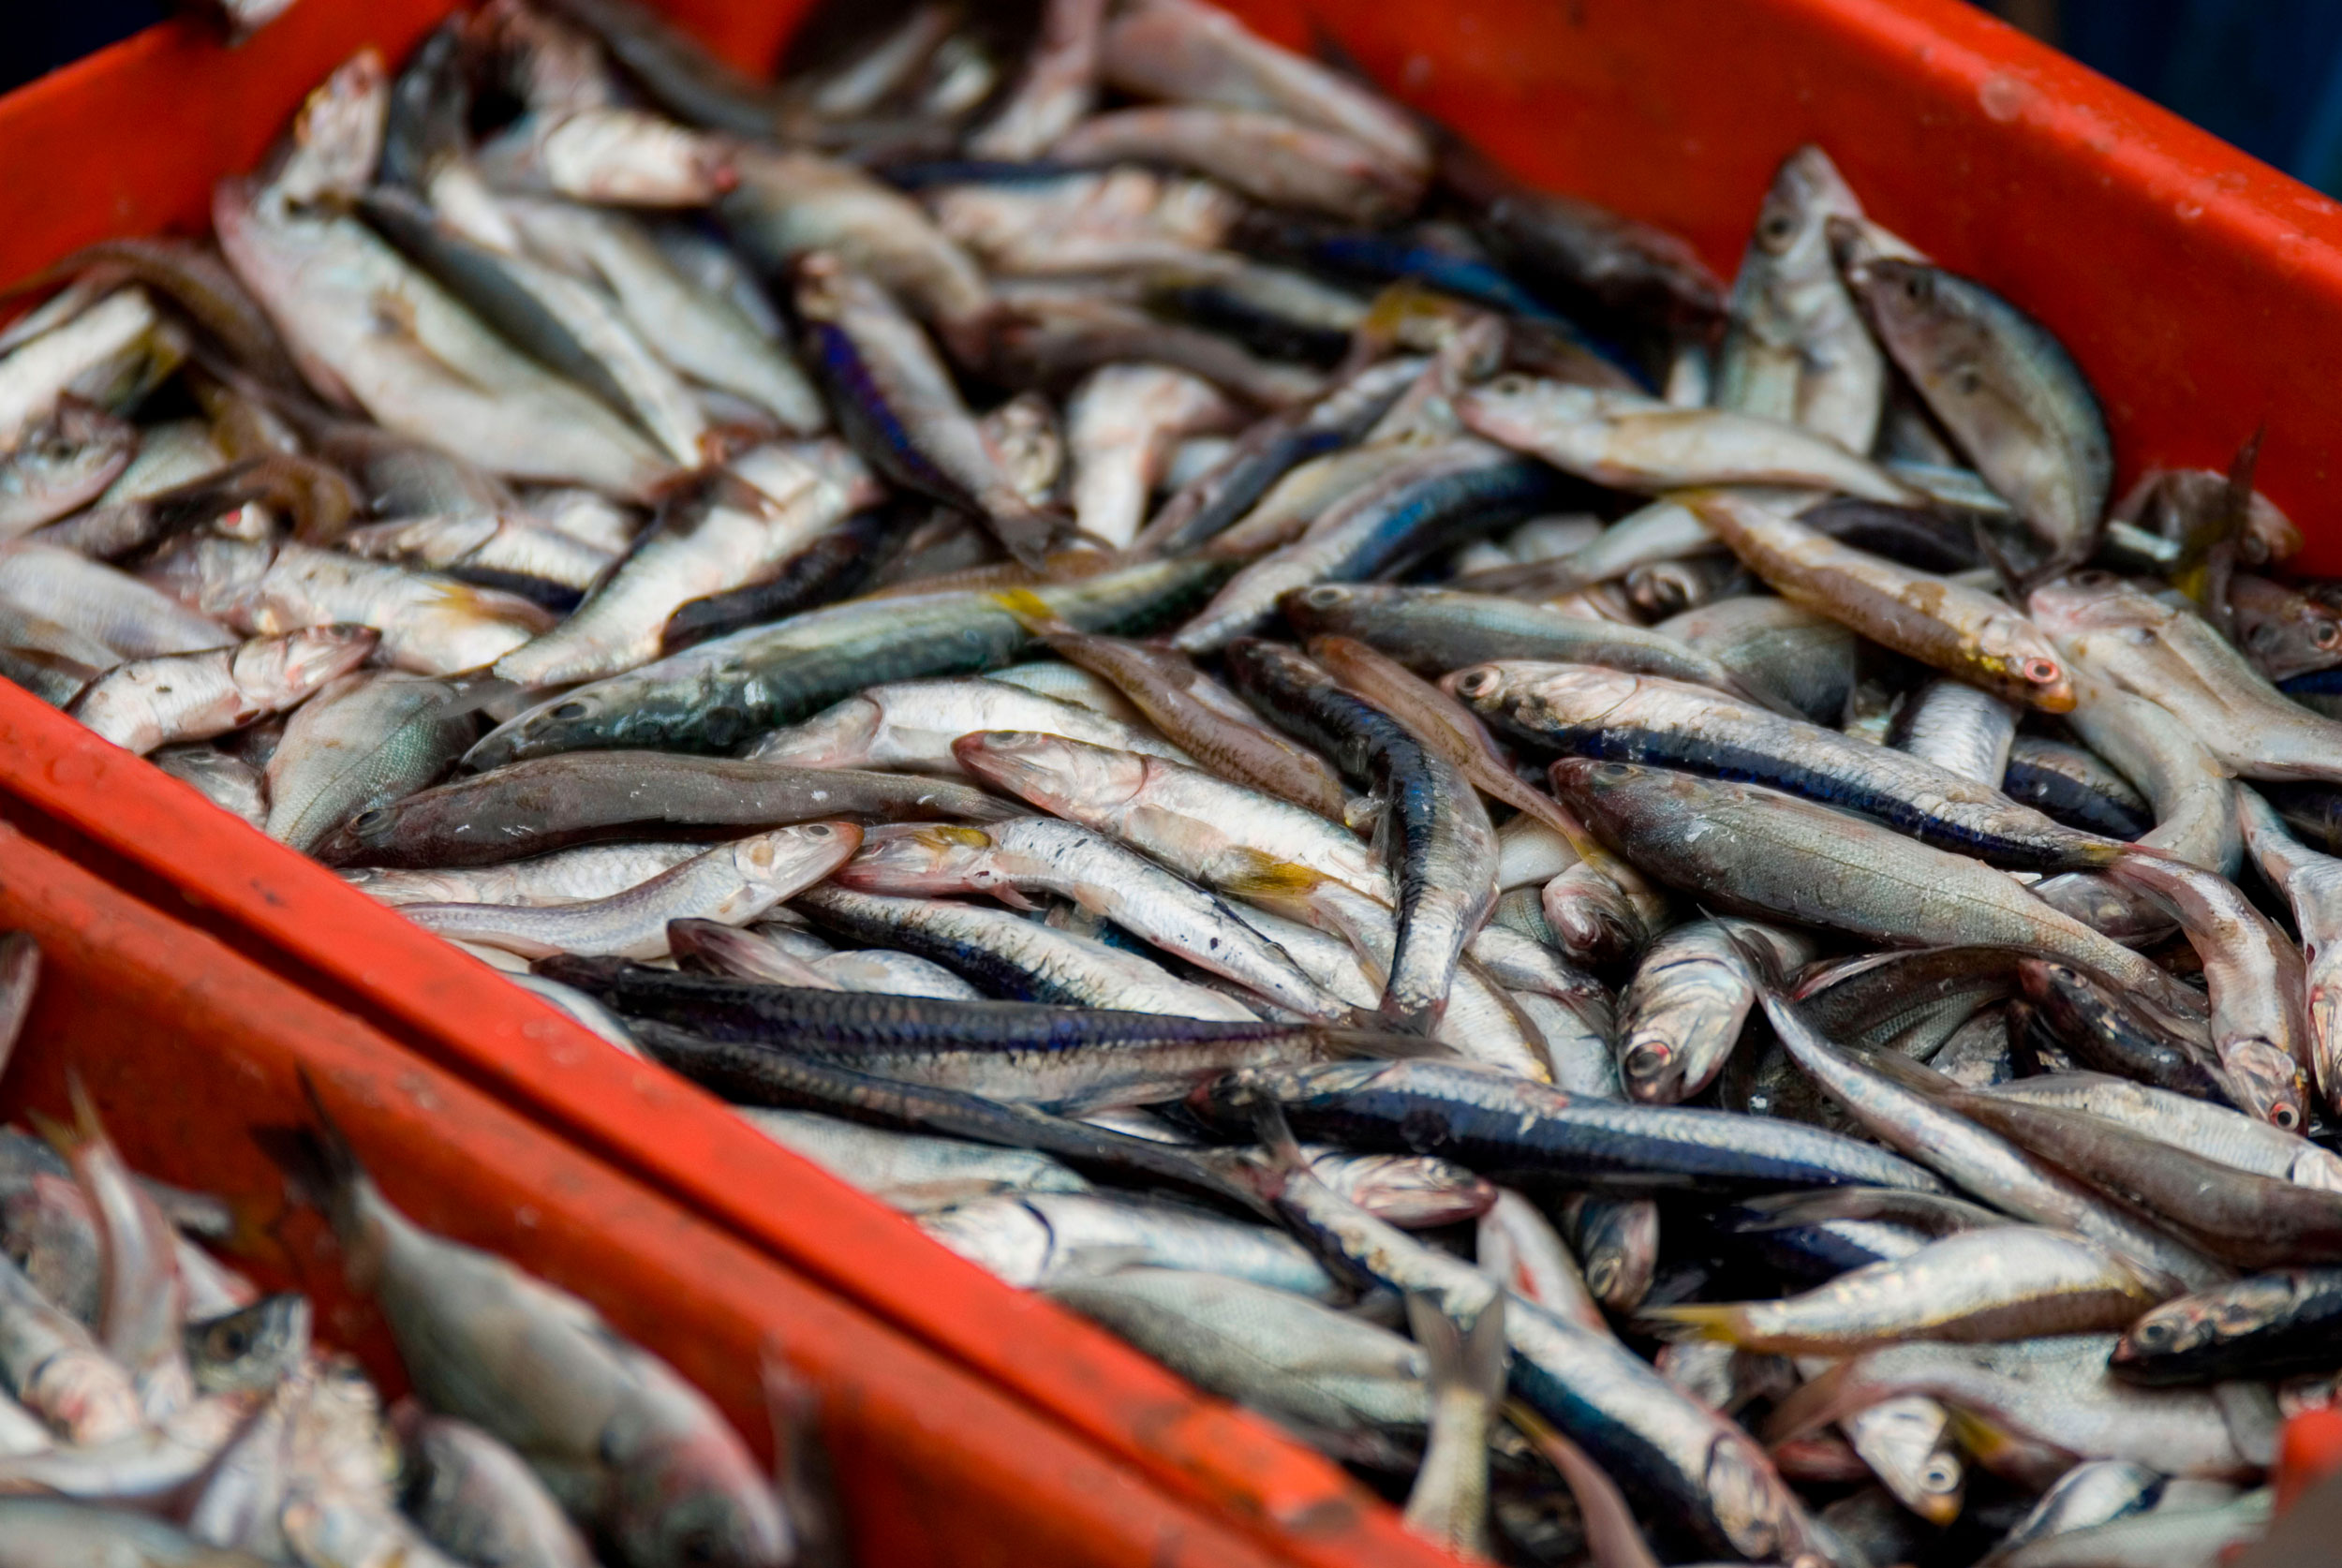 Ten million tonnes of fish wasted every year despite declining